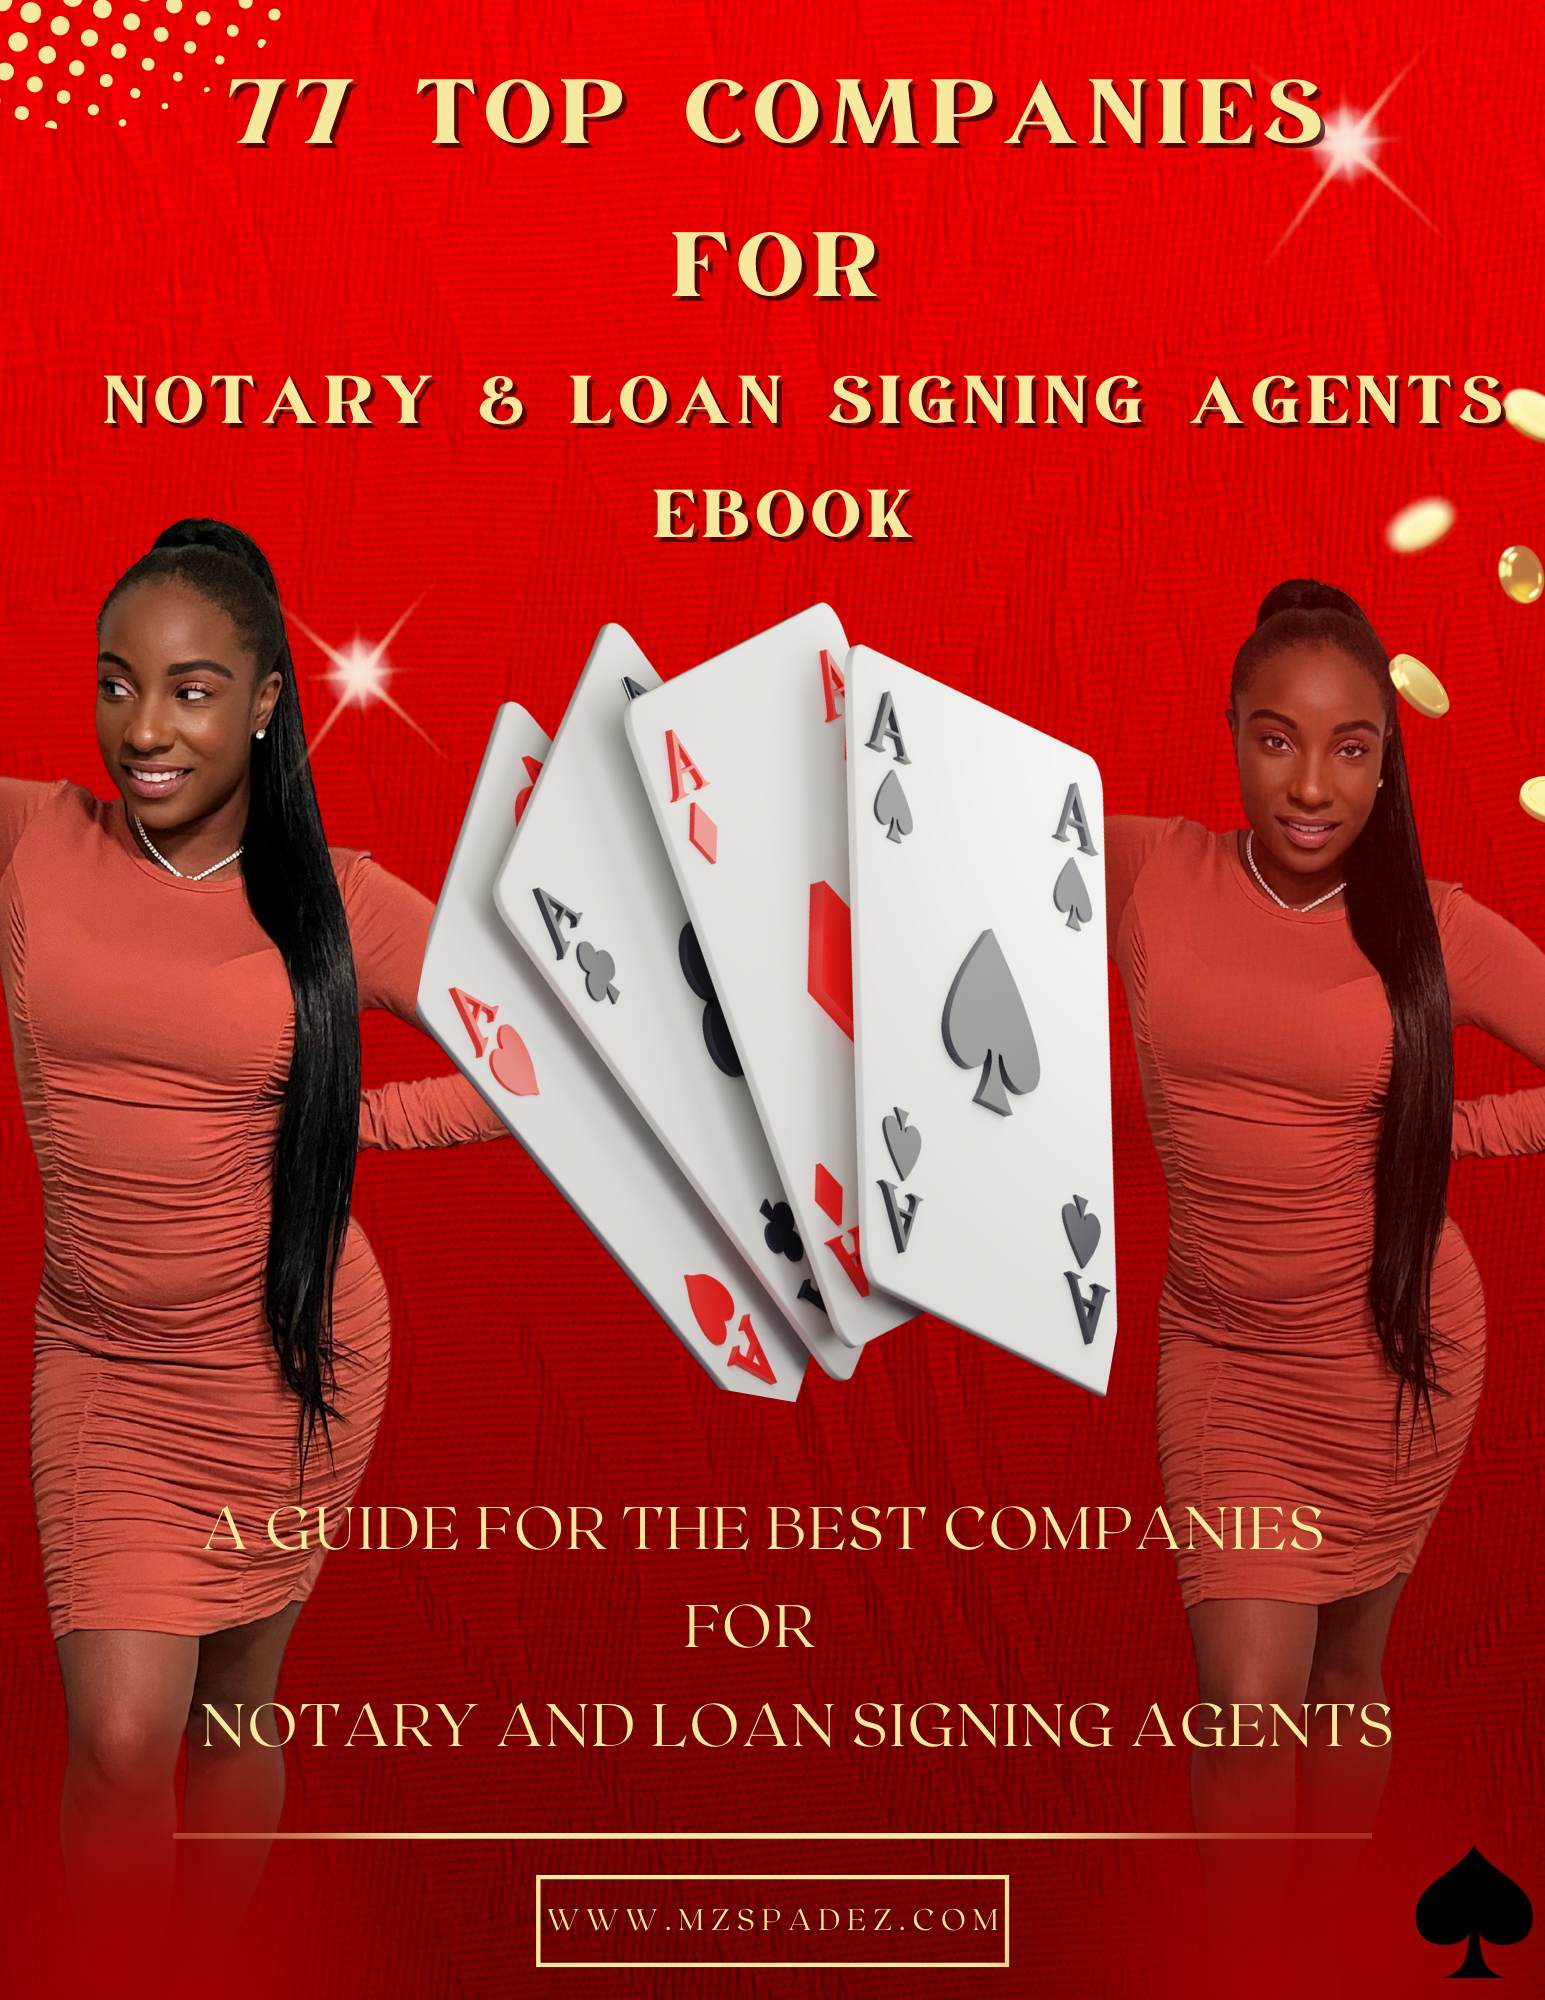 77 Top Companies For Notary Signing Agents (EBOOK)